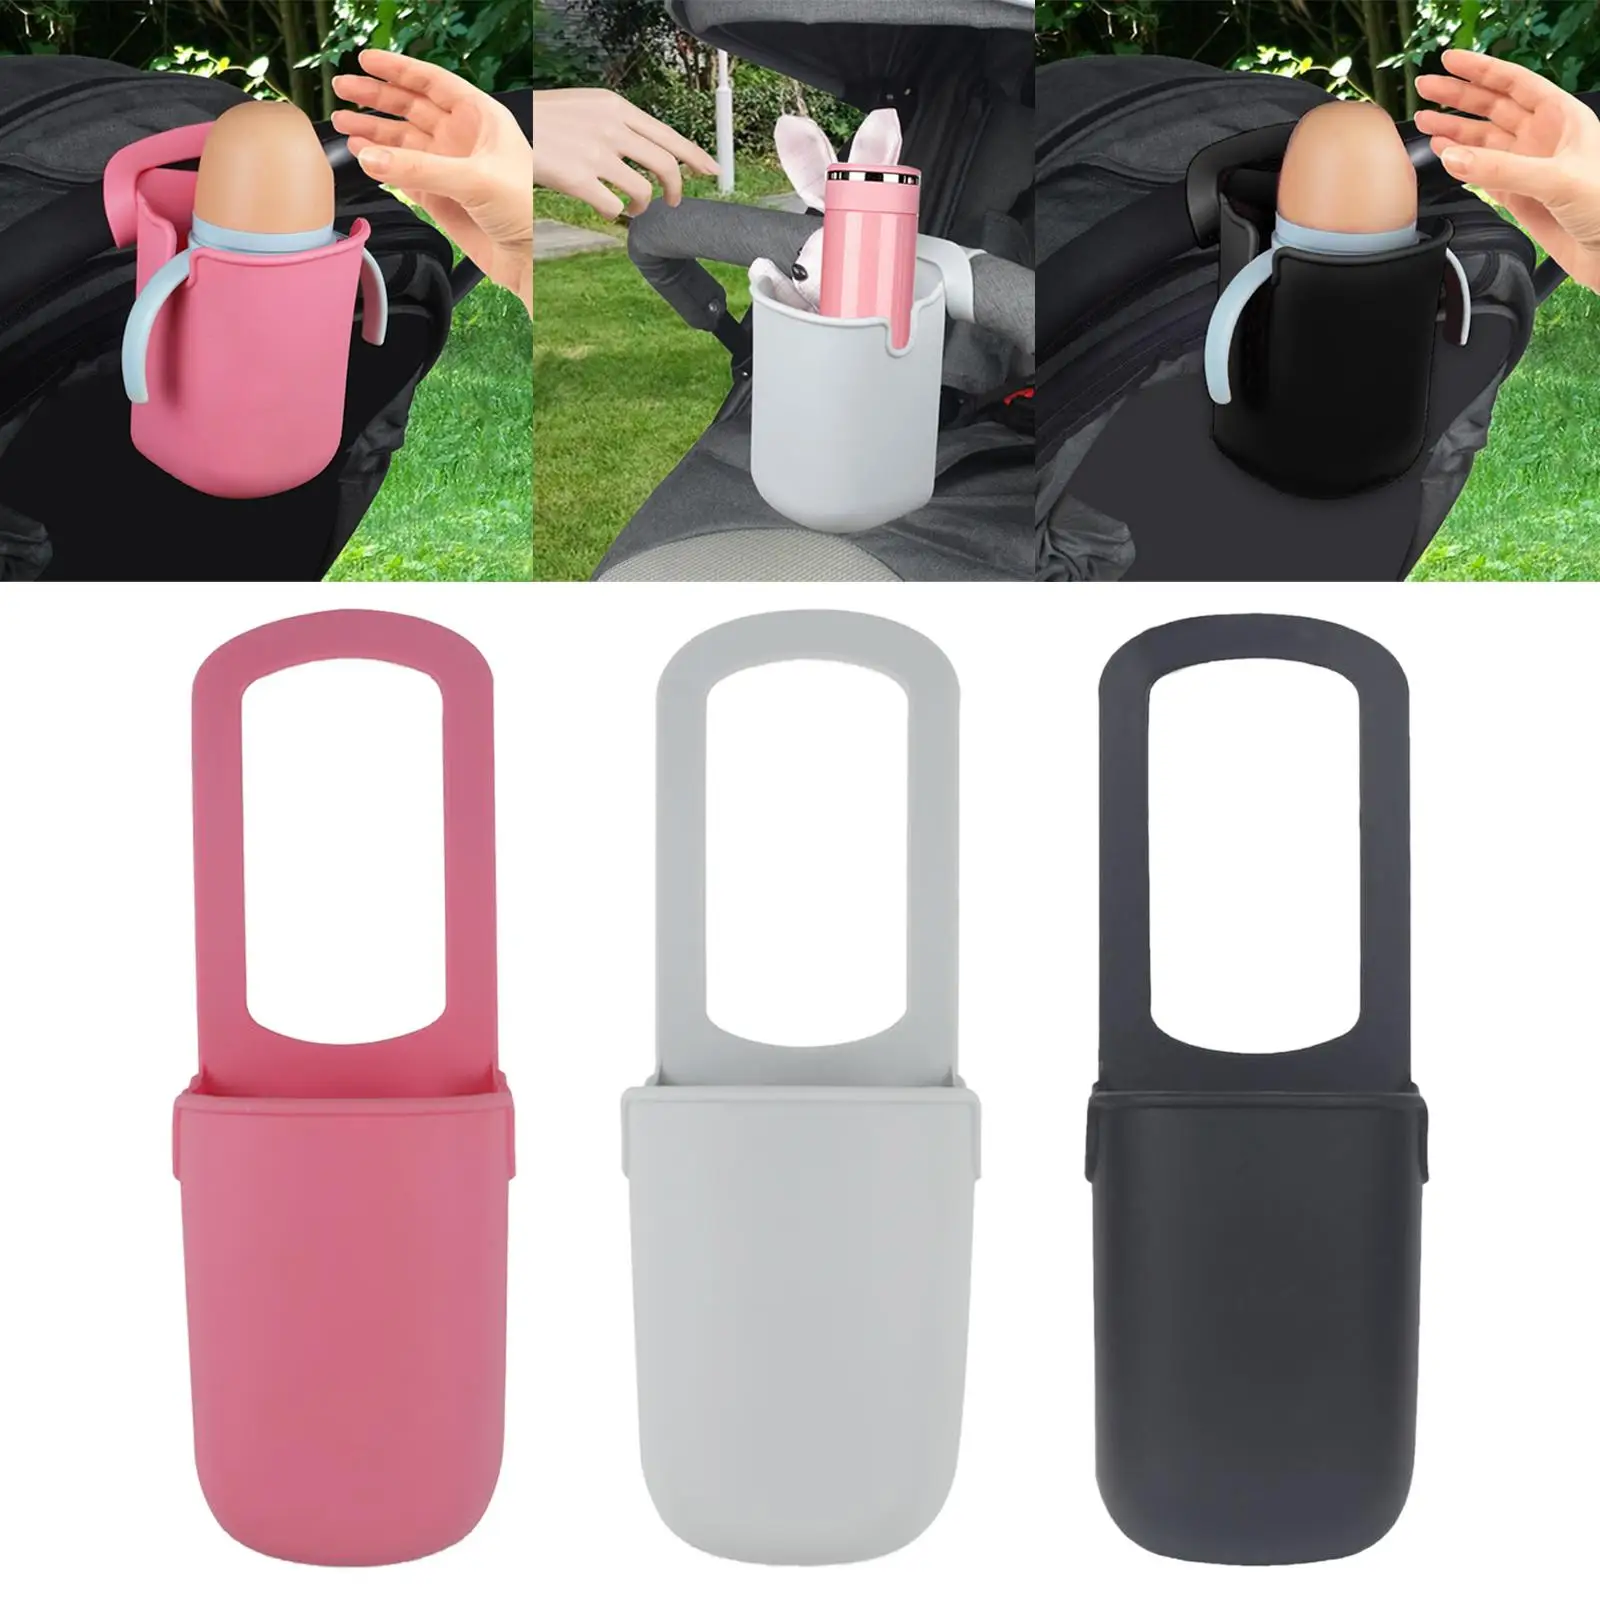 Bike Bottle Holder Vacuum Cup Silicone for Pushchair Lawn Chairs